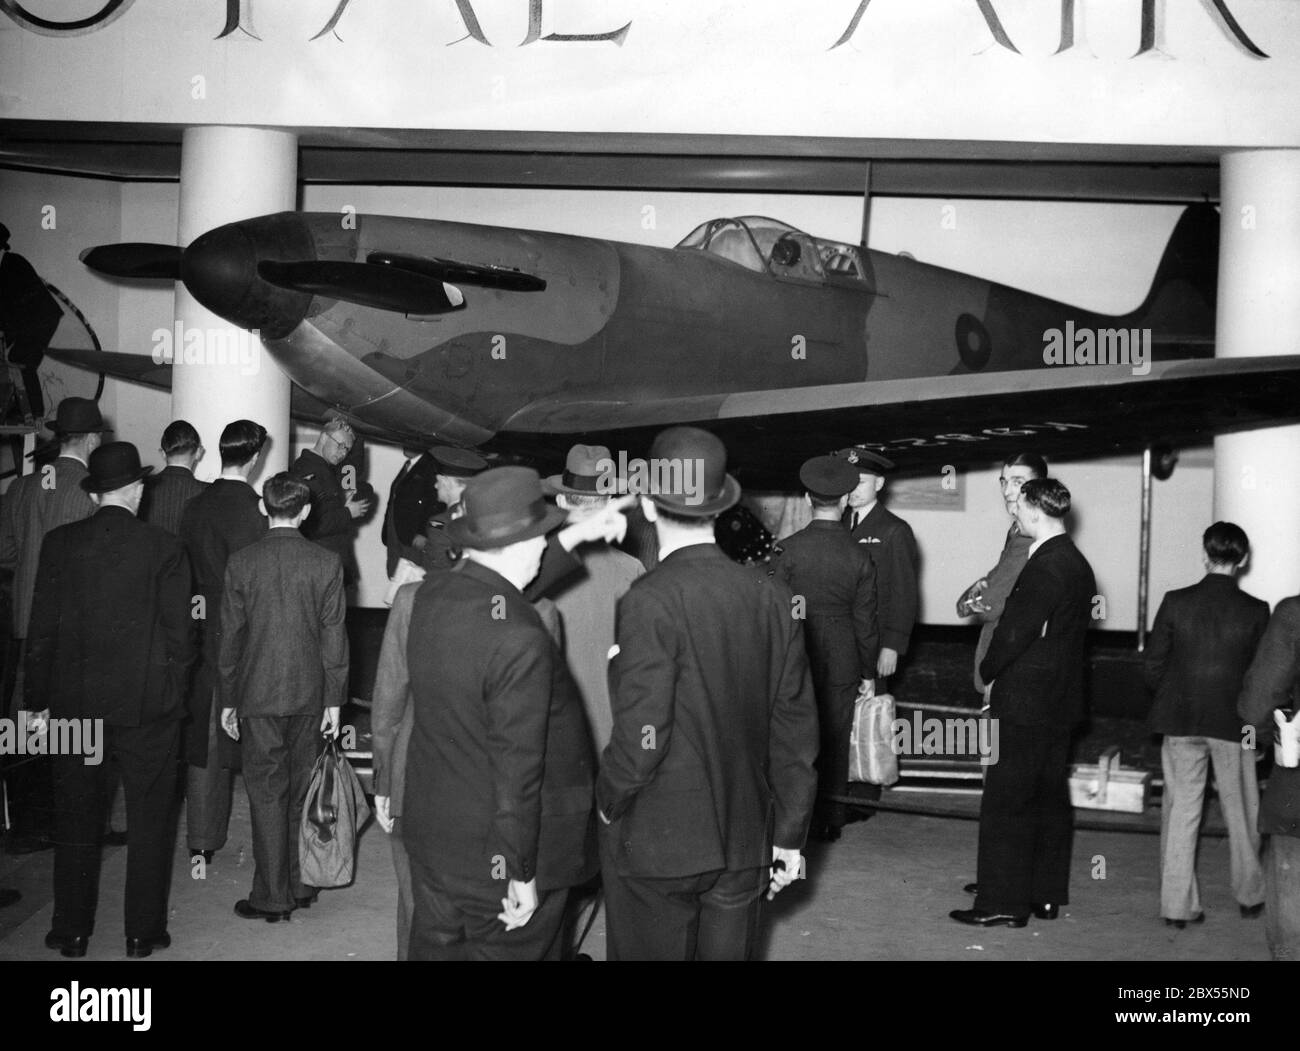 The Royal Air Force exhibition at London's Charing Cross Underground Station features a new 'Spitfire' fighter aircraft. Stock Photo